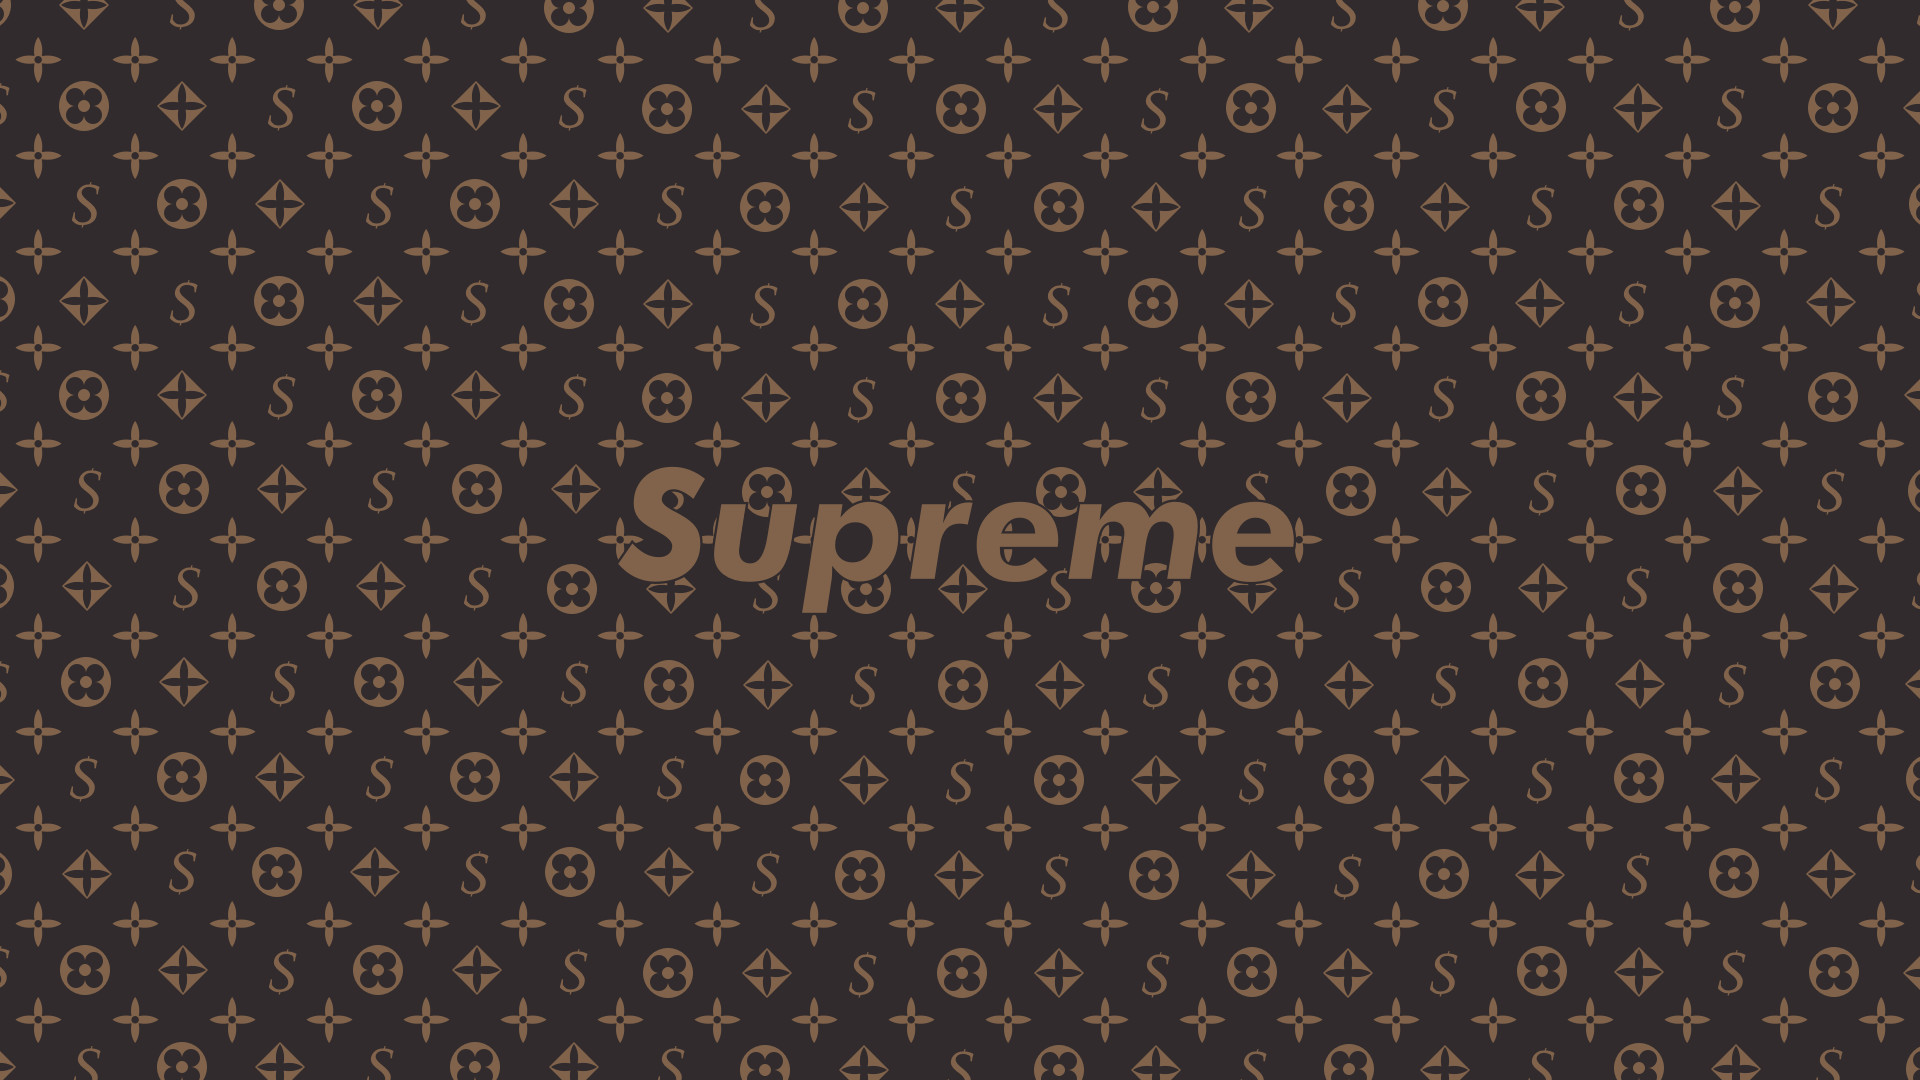 1920x1080 Some Supreme x LV Wallpapers I made